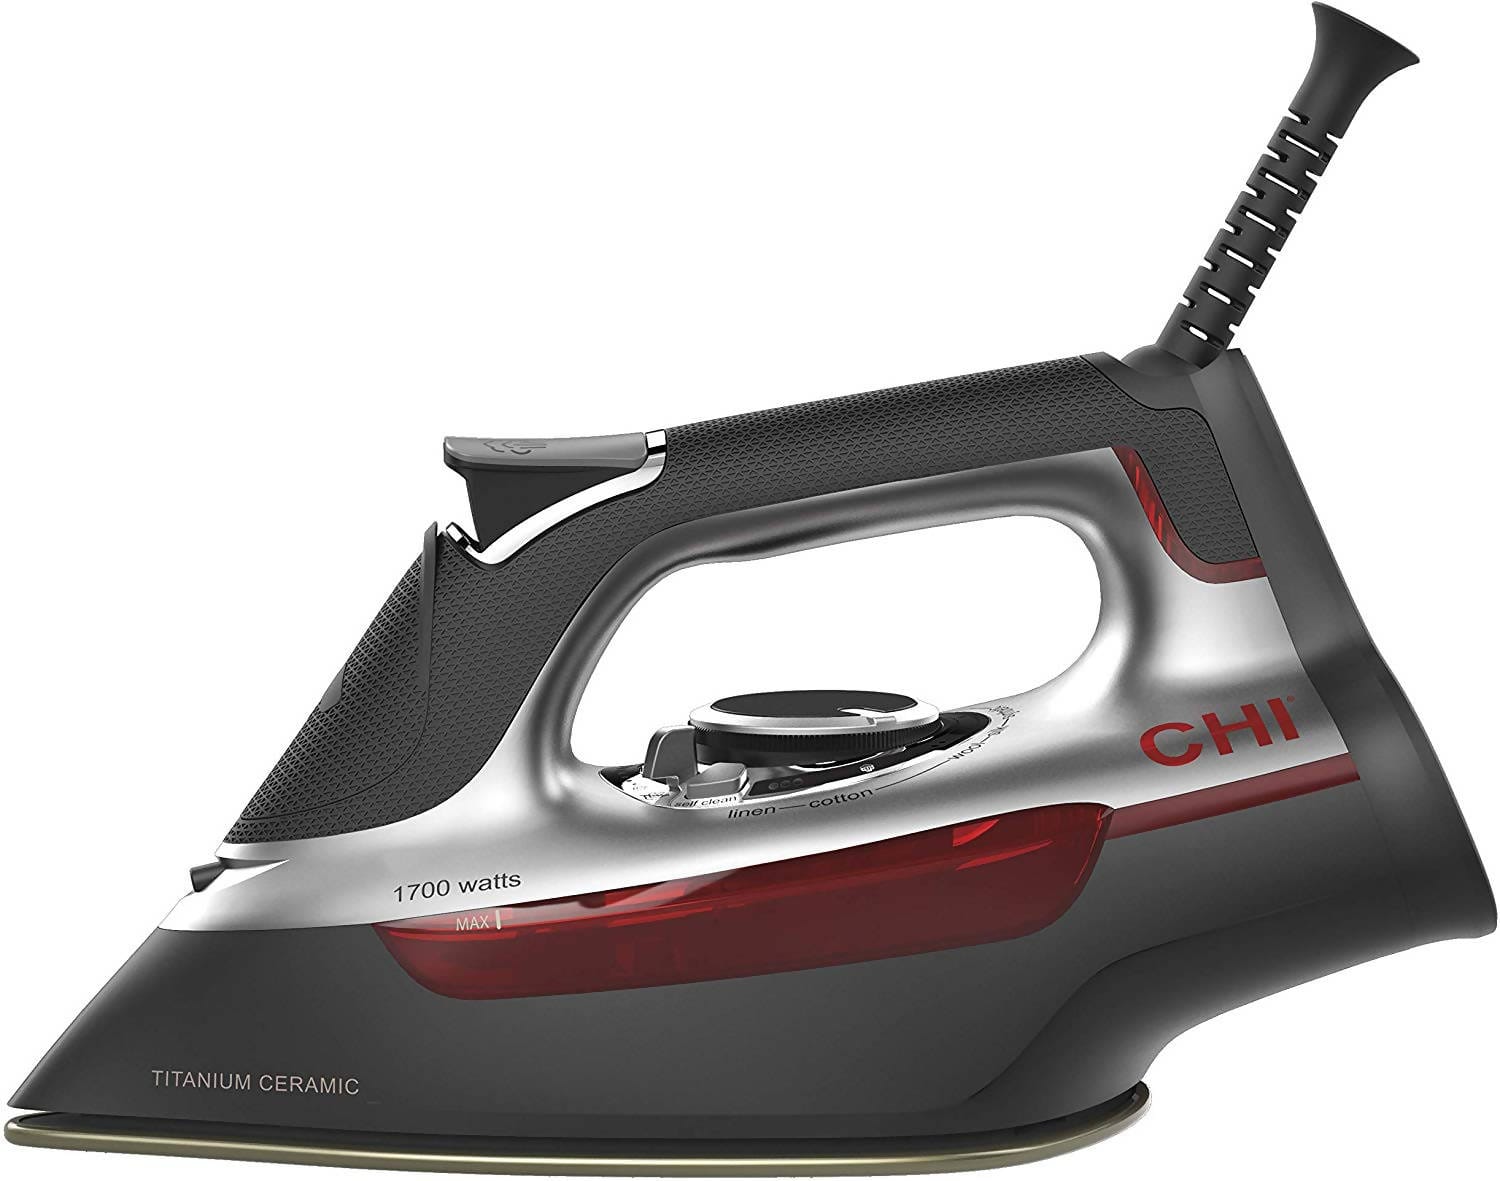 CHI Steam Iron Ceramic -Is engineered with a titanium infused ceramic soleplate similar to our popular CHI flat irons, the professional clothing iron heats up quickly and provides an extra smooth glide - 41998